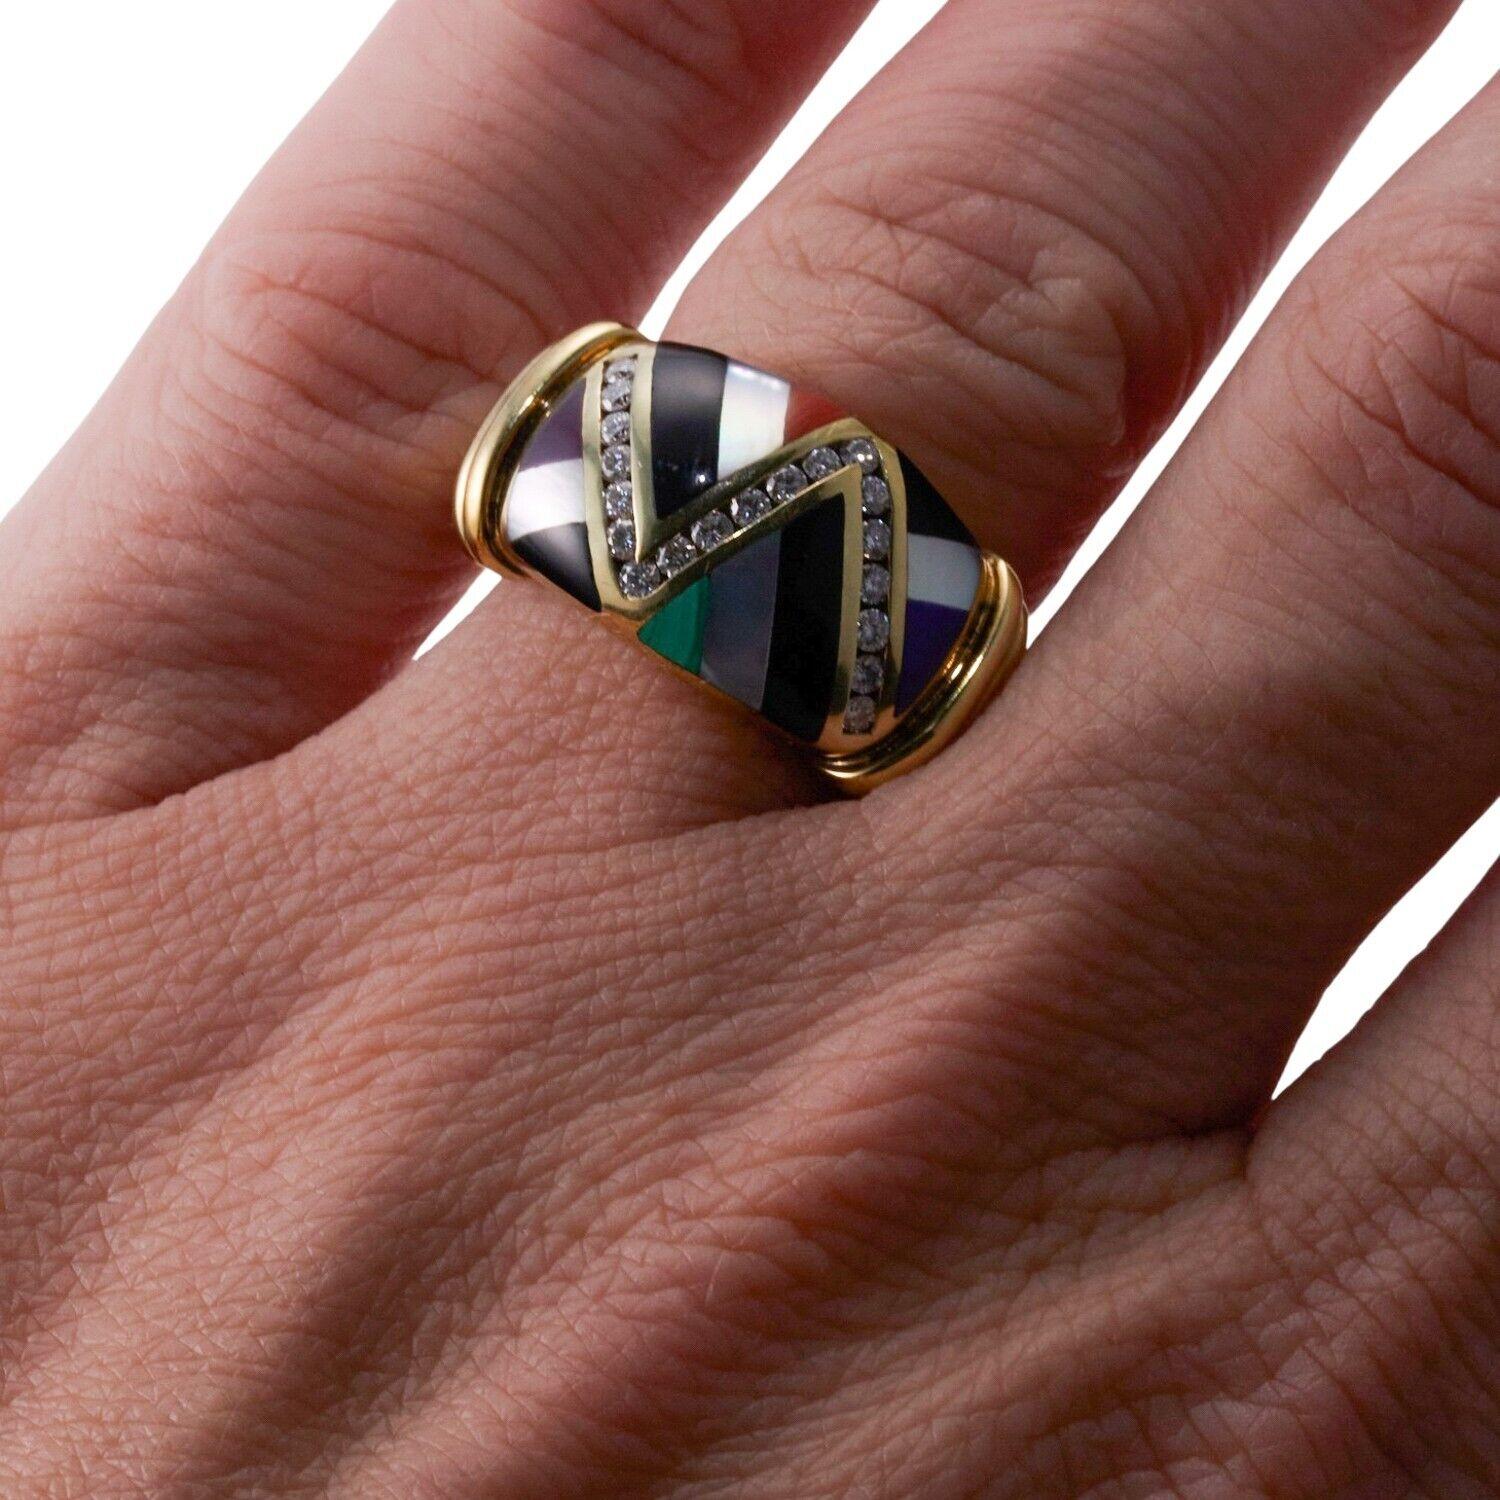 A 14k yellow gold ring set with mother-of-pearl, coral, malachite, purple sugilite, onyx and diamonds - approx. 0.28ctw. Ring Size 6.5, 12mm wide. 9.7 grams.